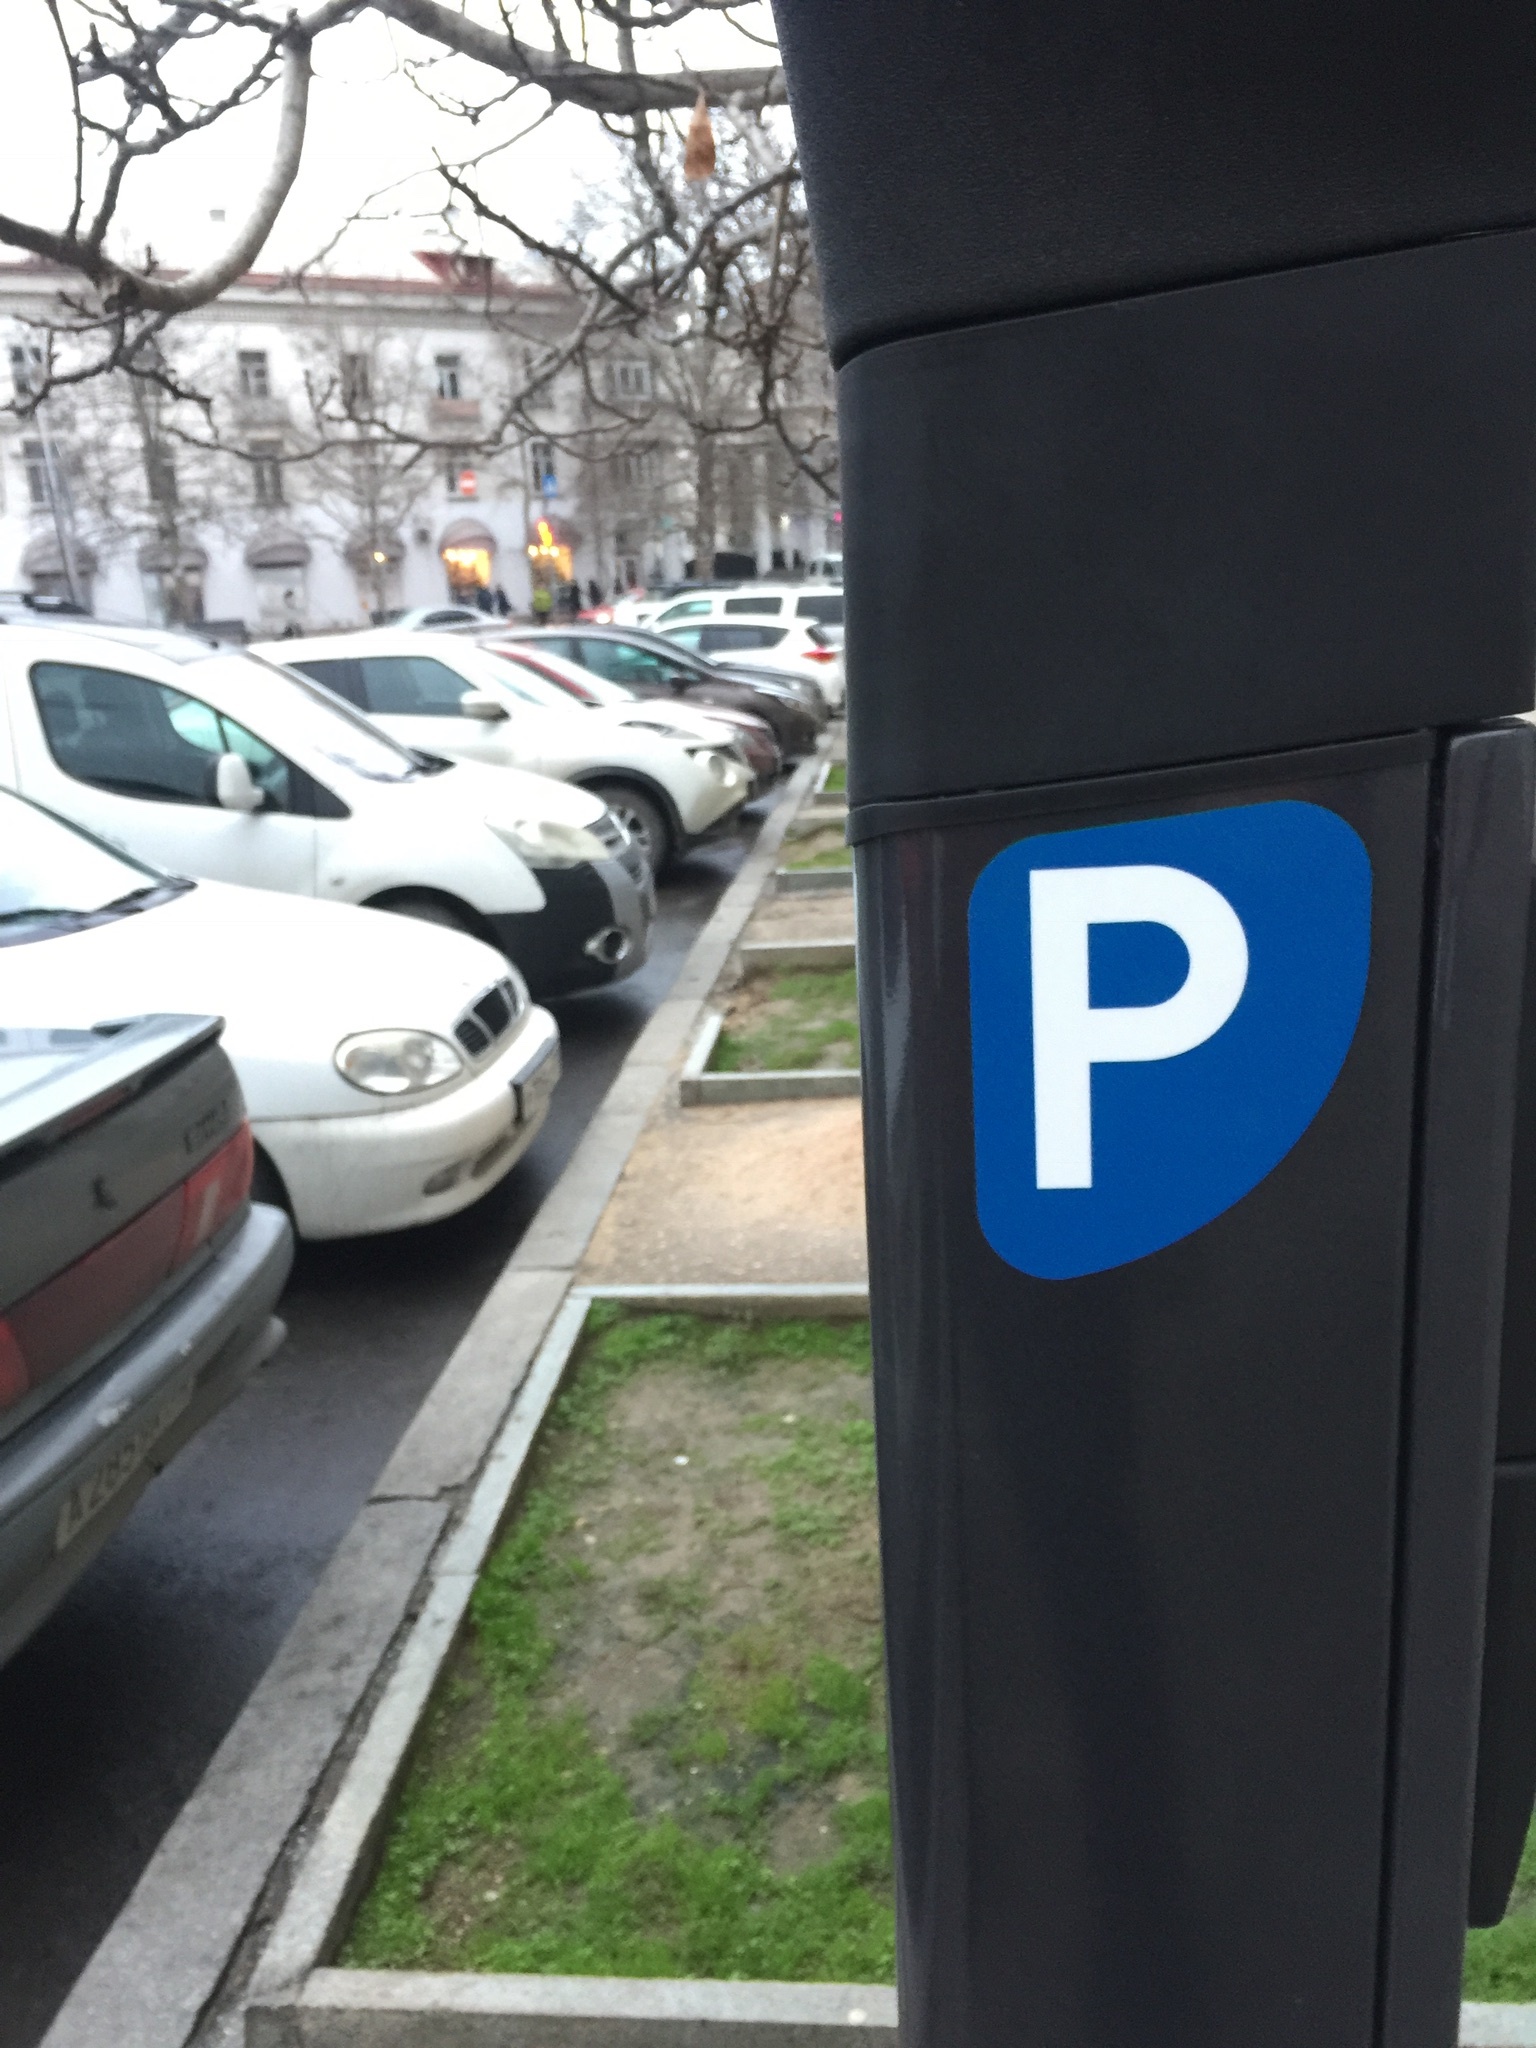 What was at the beginning of the parking meter or markings? - My, Politics, Longpost, Parking, Parking meter